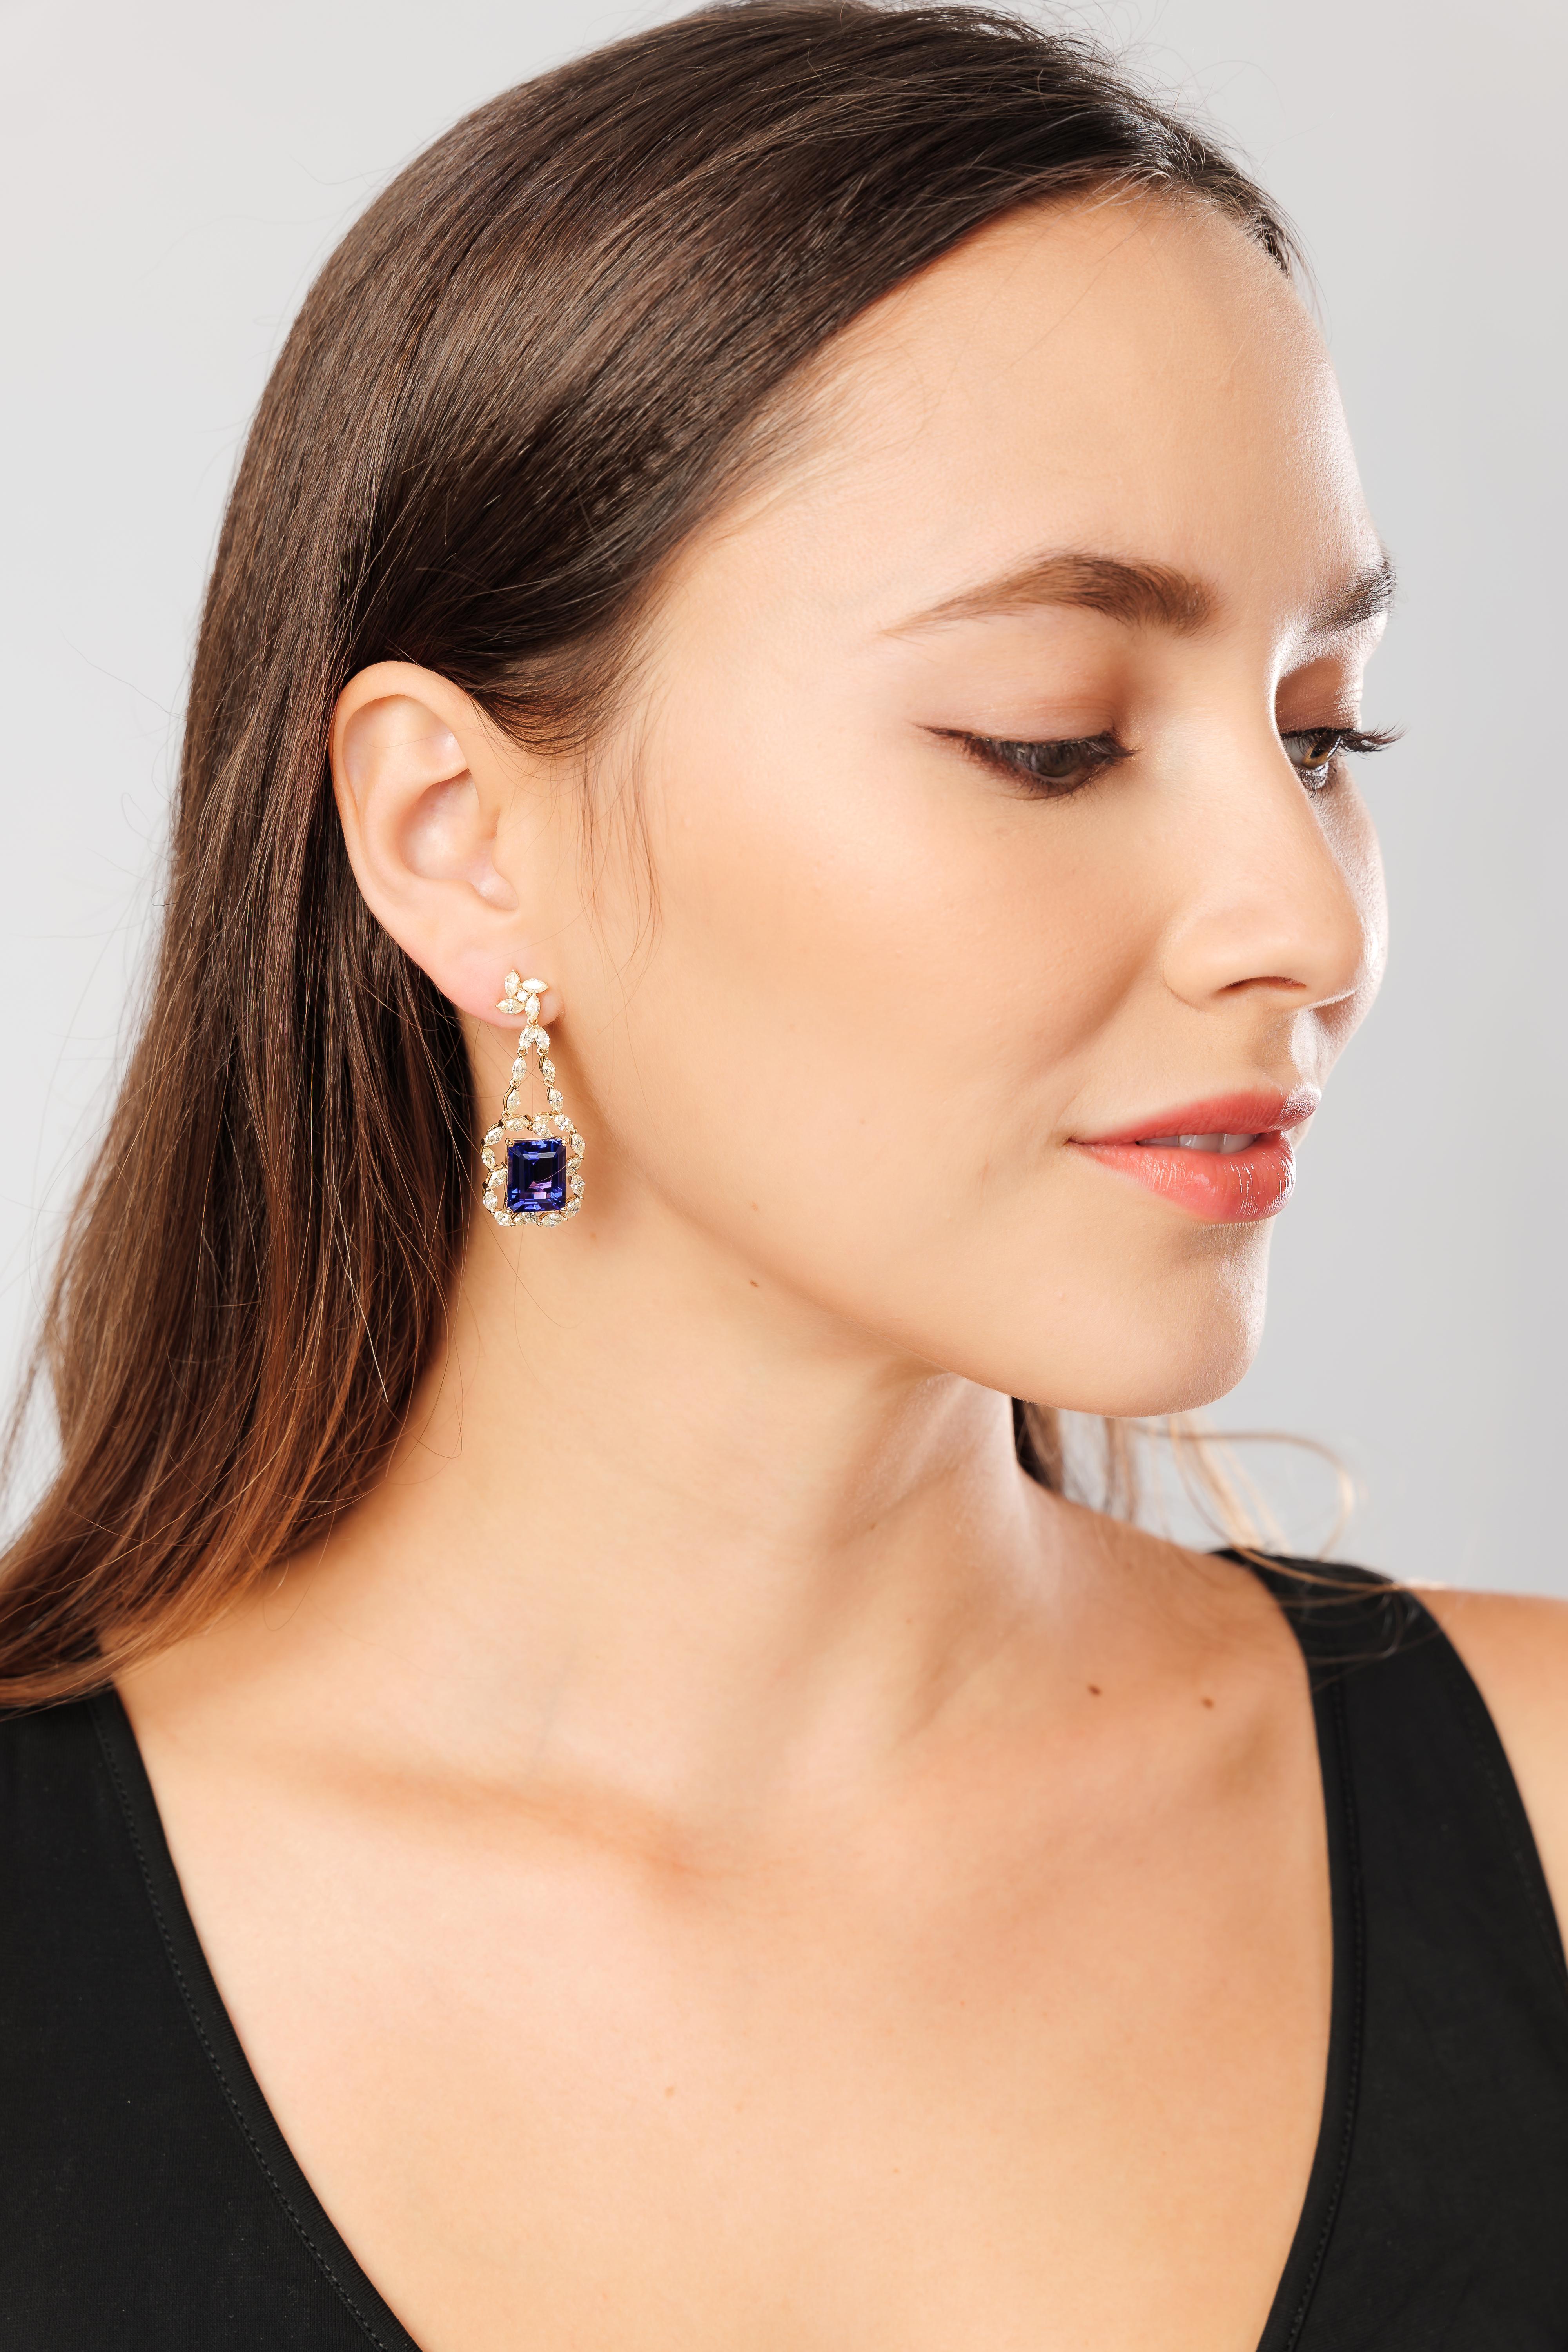 This collection features a selection of the most tantalizing Tanzanites. This enchanting East African gemstone can only be procured from one mine in the foothills of Mount Kilimanjaro, Tanzania. These Tanzanite Orchid Earrings host rich purple-blue